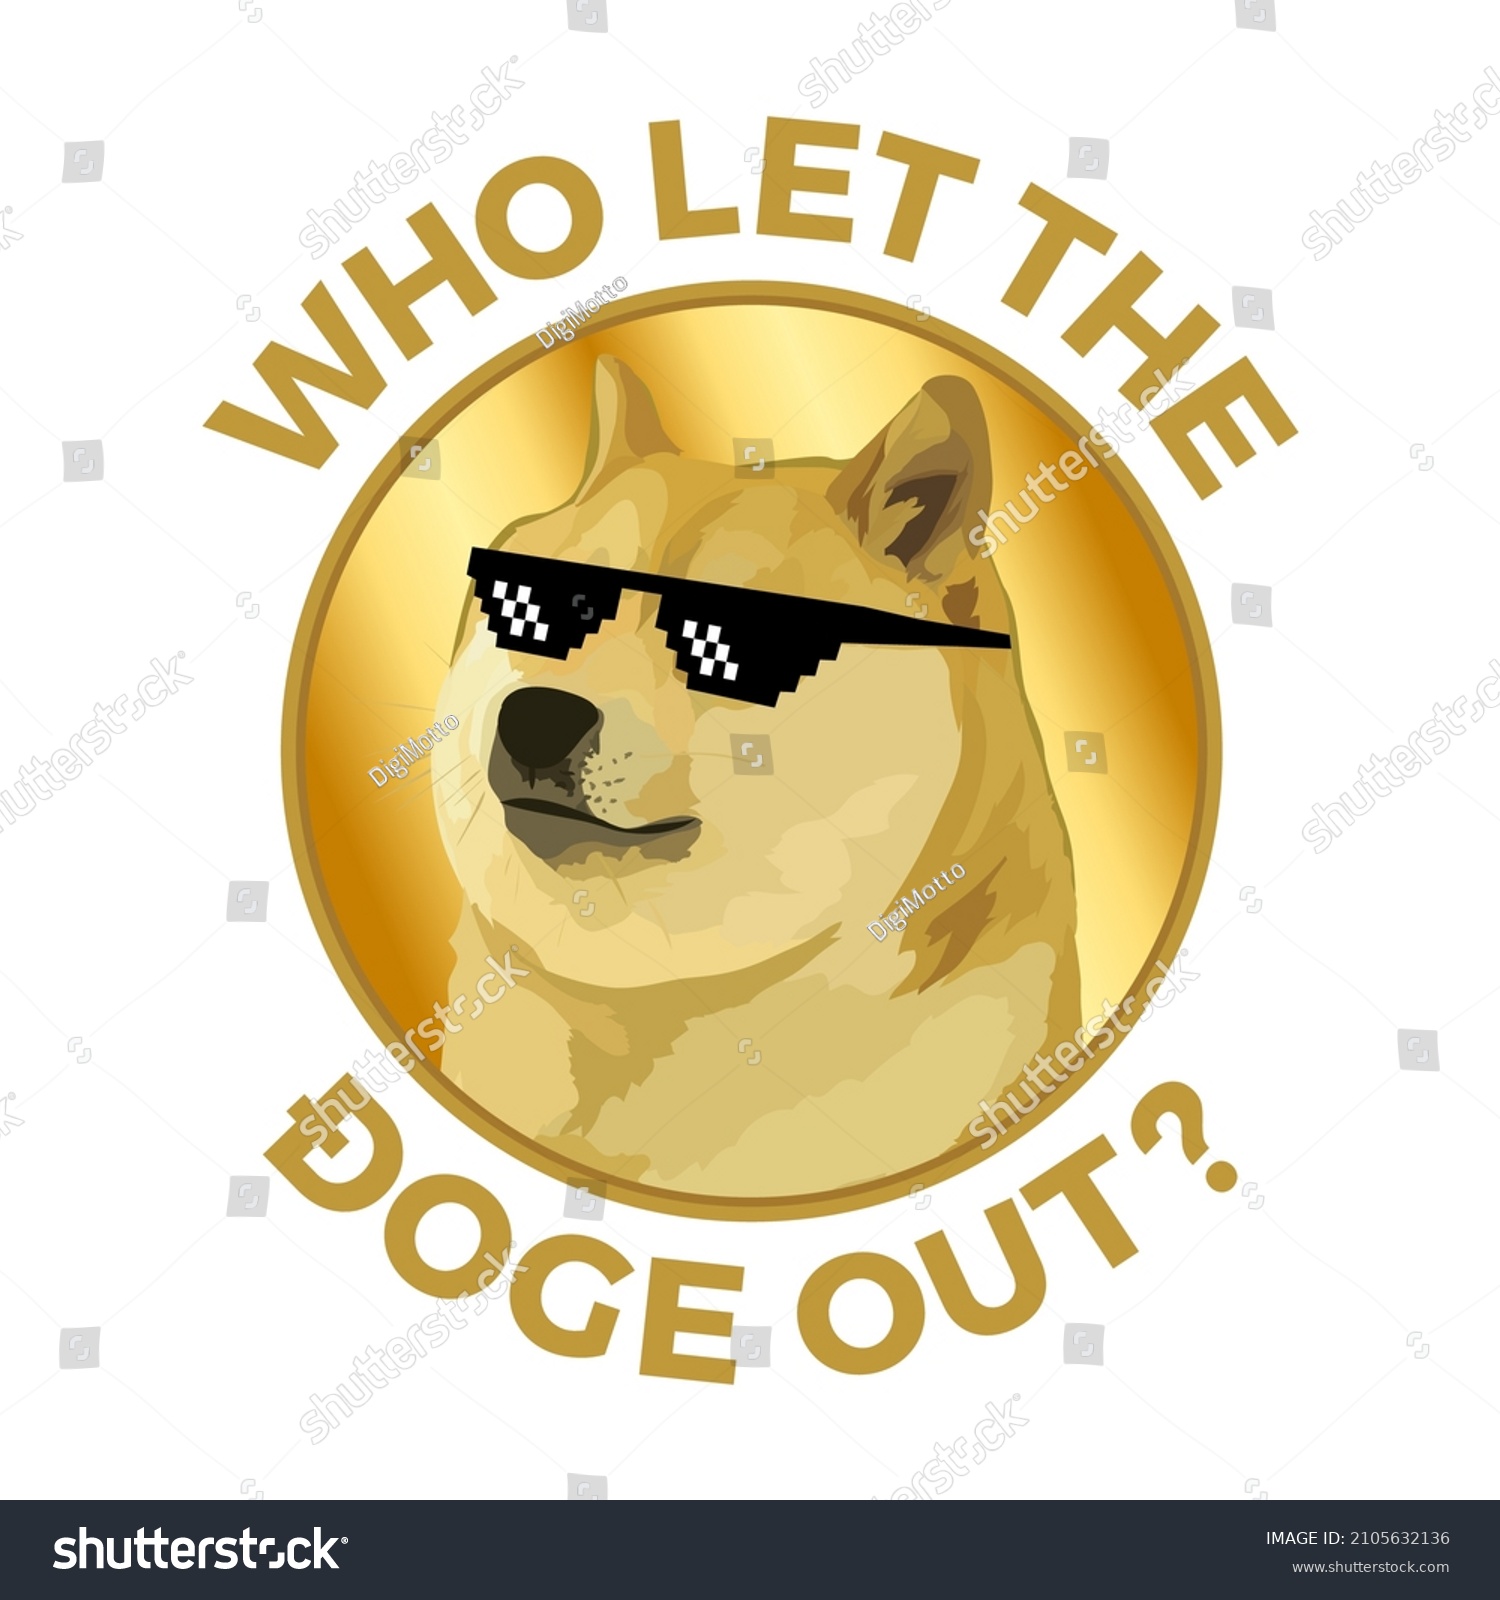 SVG of Who let the doge out meme doge coin concept cryptocurrency vector illustration with golden background for coin svg